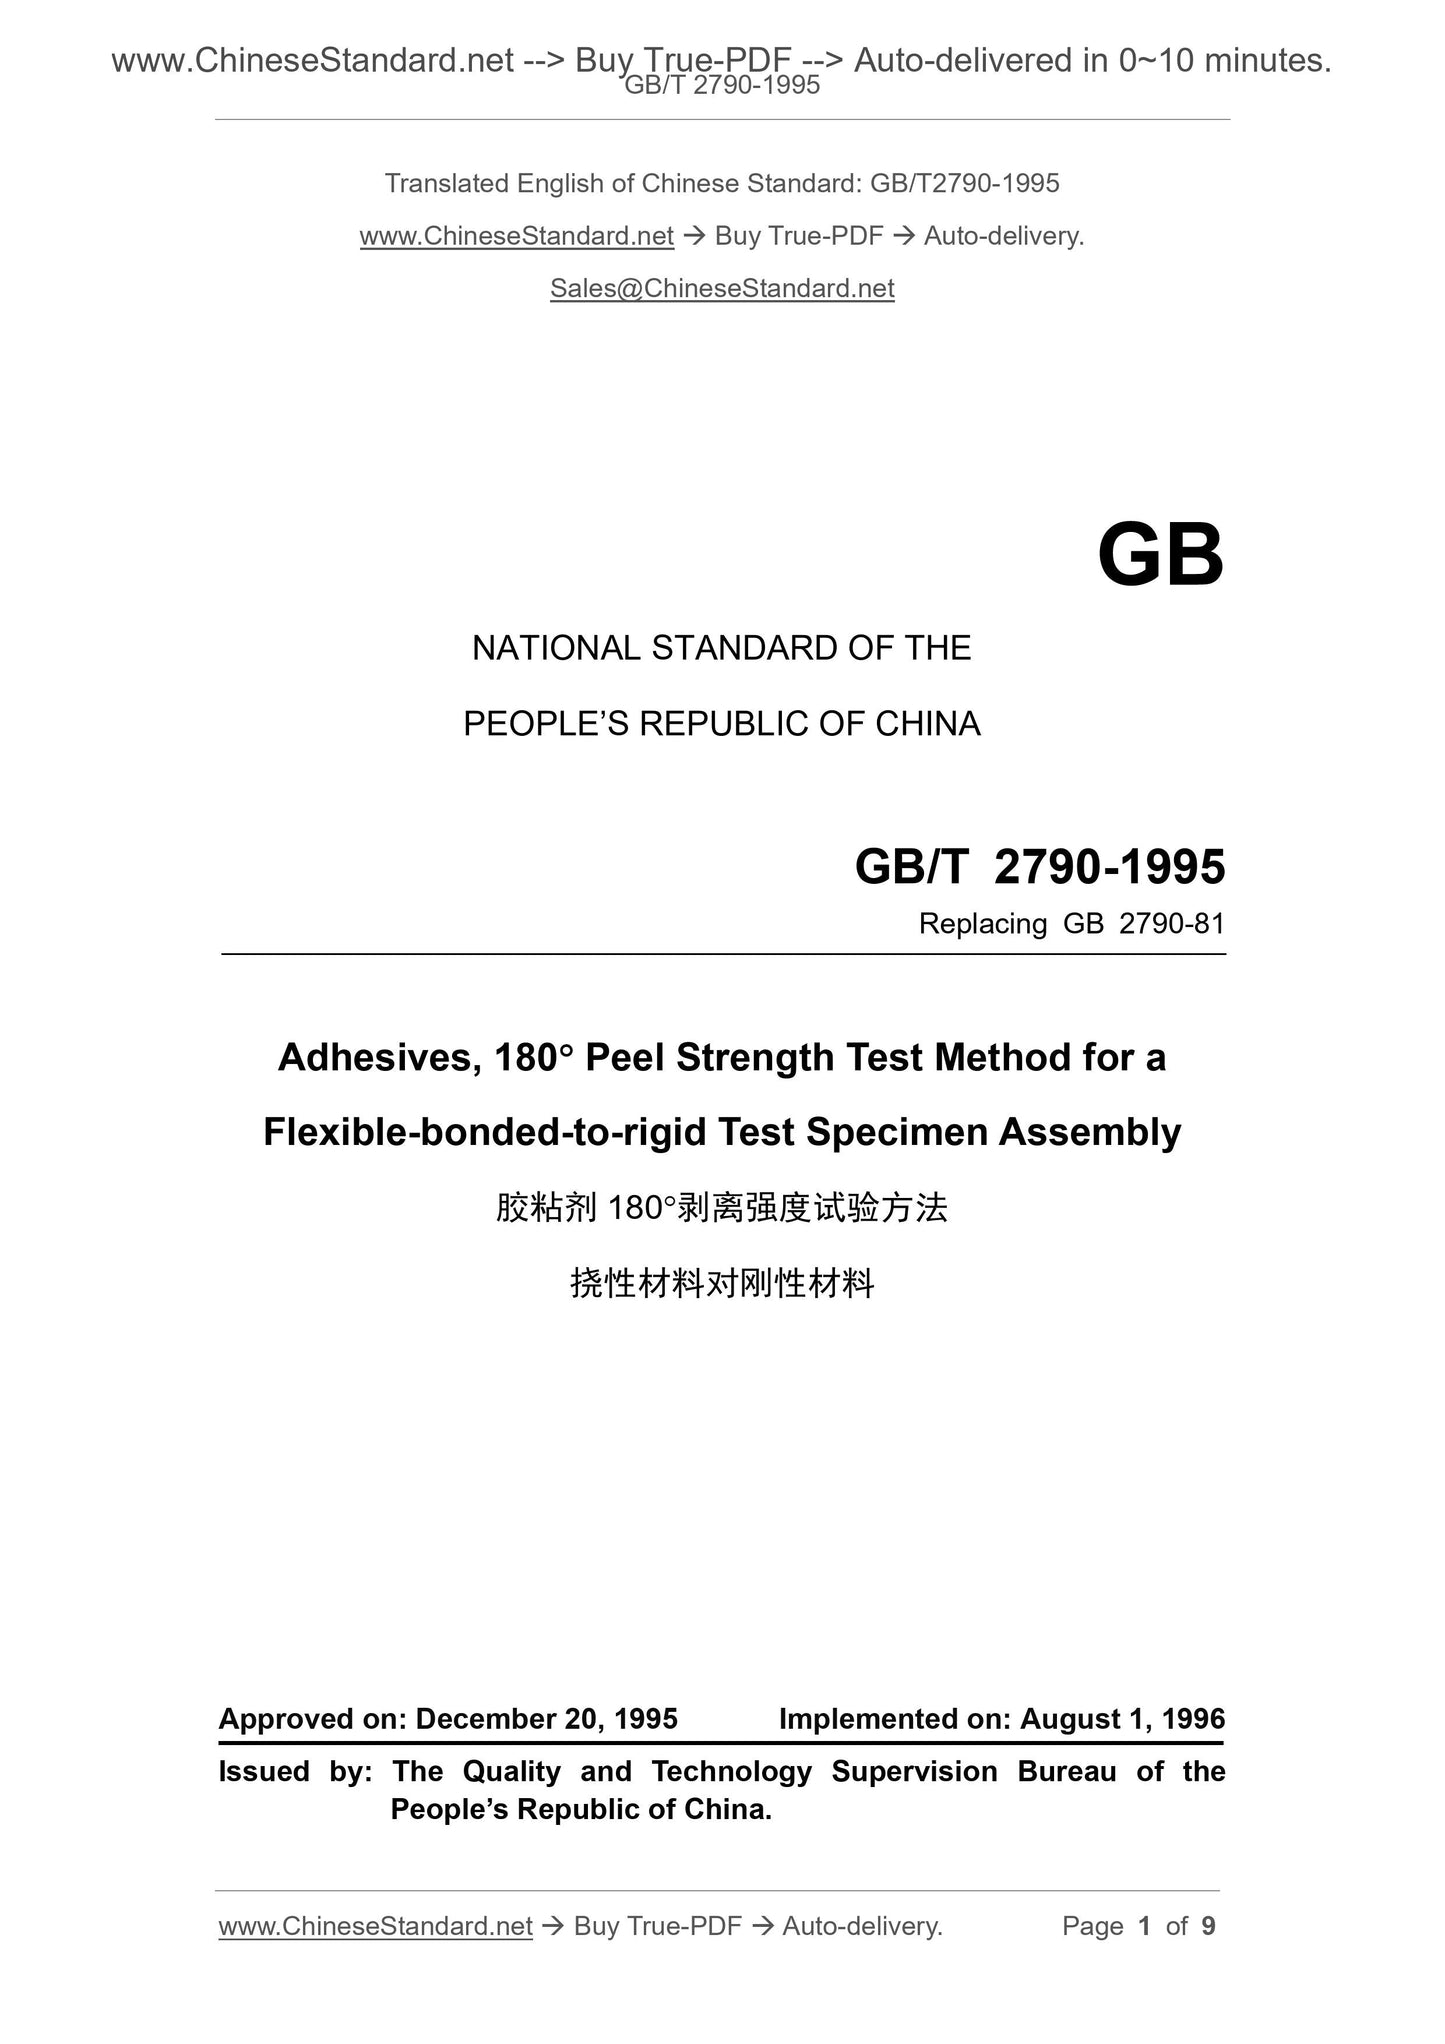 GB/T 2790-1995 Page 1